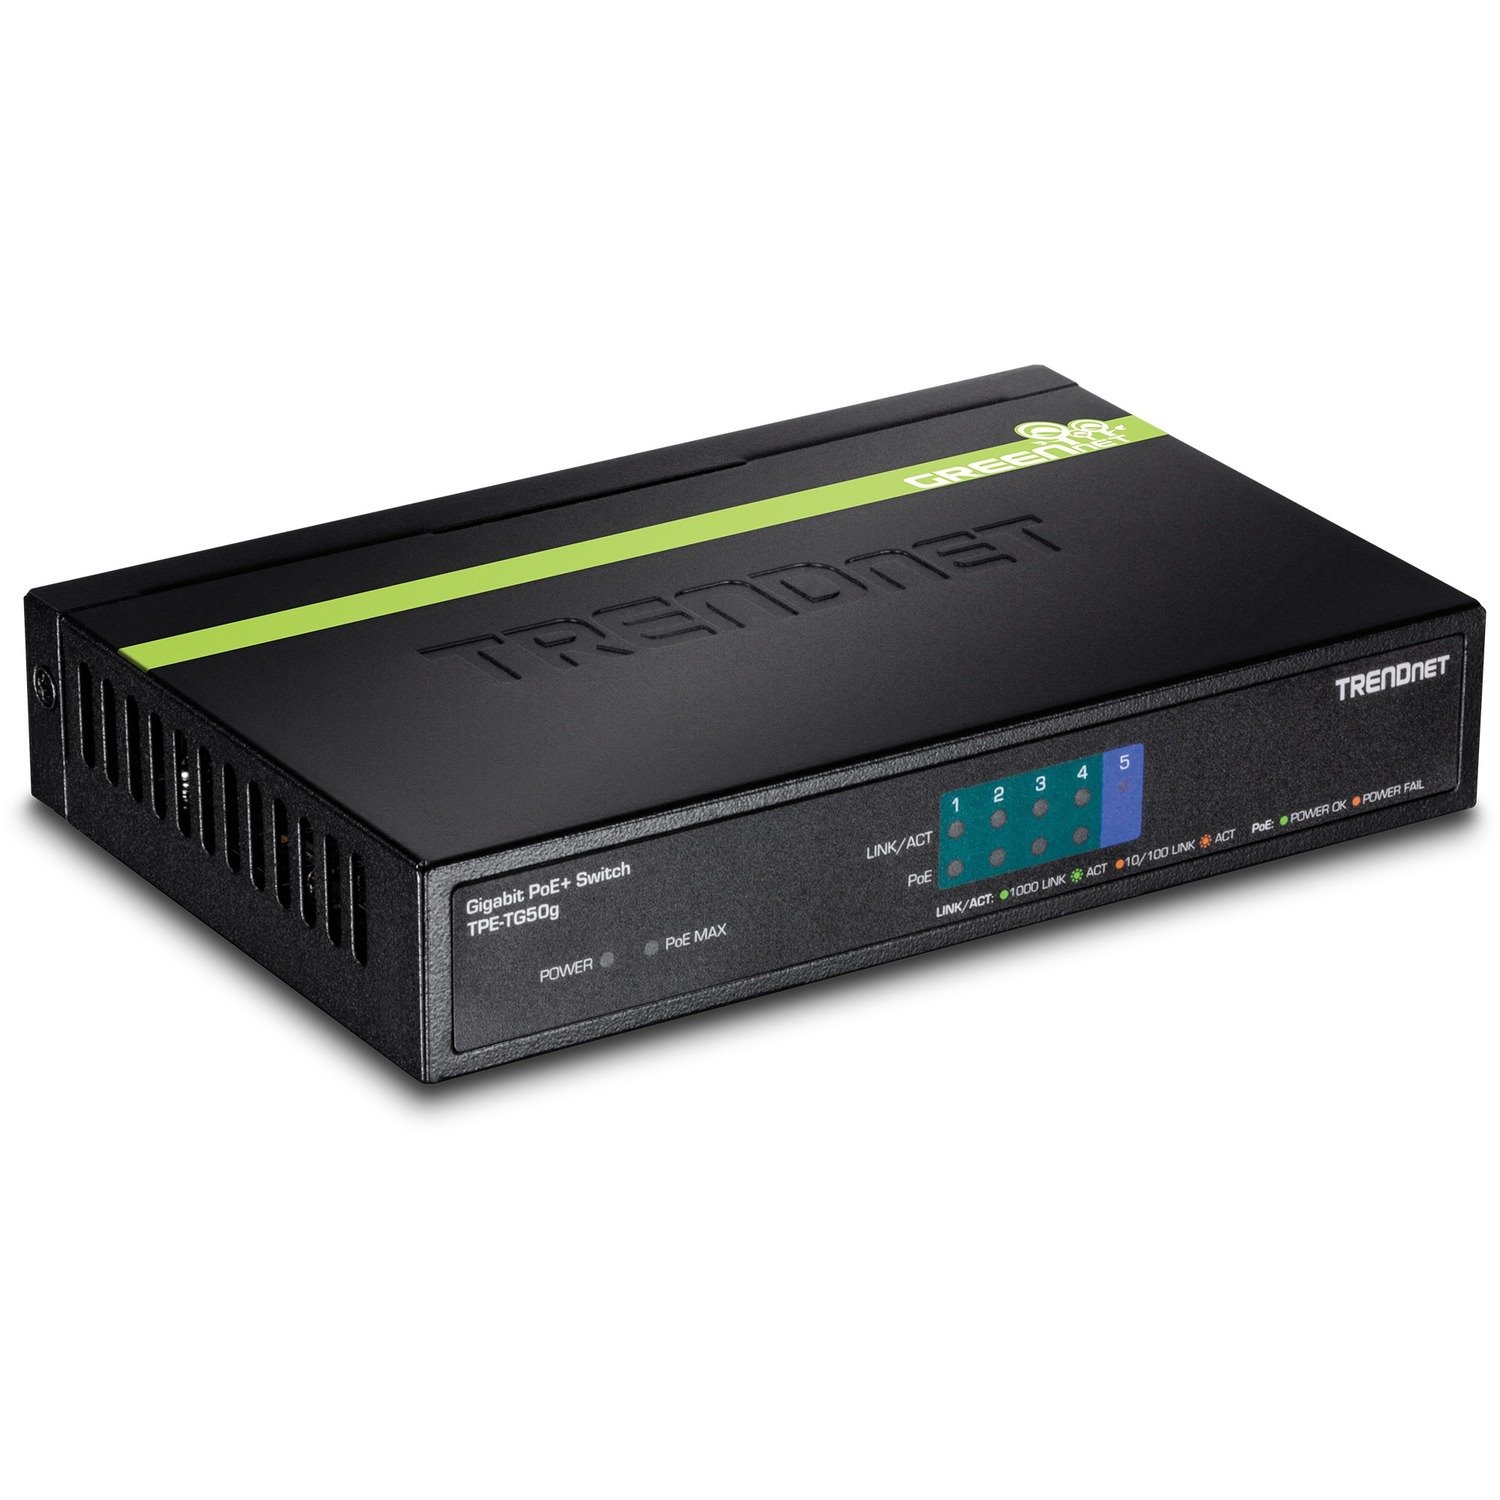 TRENDnet 5-Port Gigabit PoE+ Switch, 31 W PoE Budget, 10 Gbps Switching Capacity, Data & Power Through Ethernet To PoE Access Points And IP Cameras, Full & Half Duplex, Black, TPE-TG50g